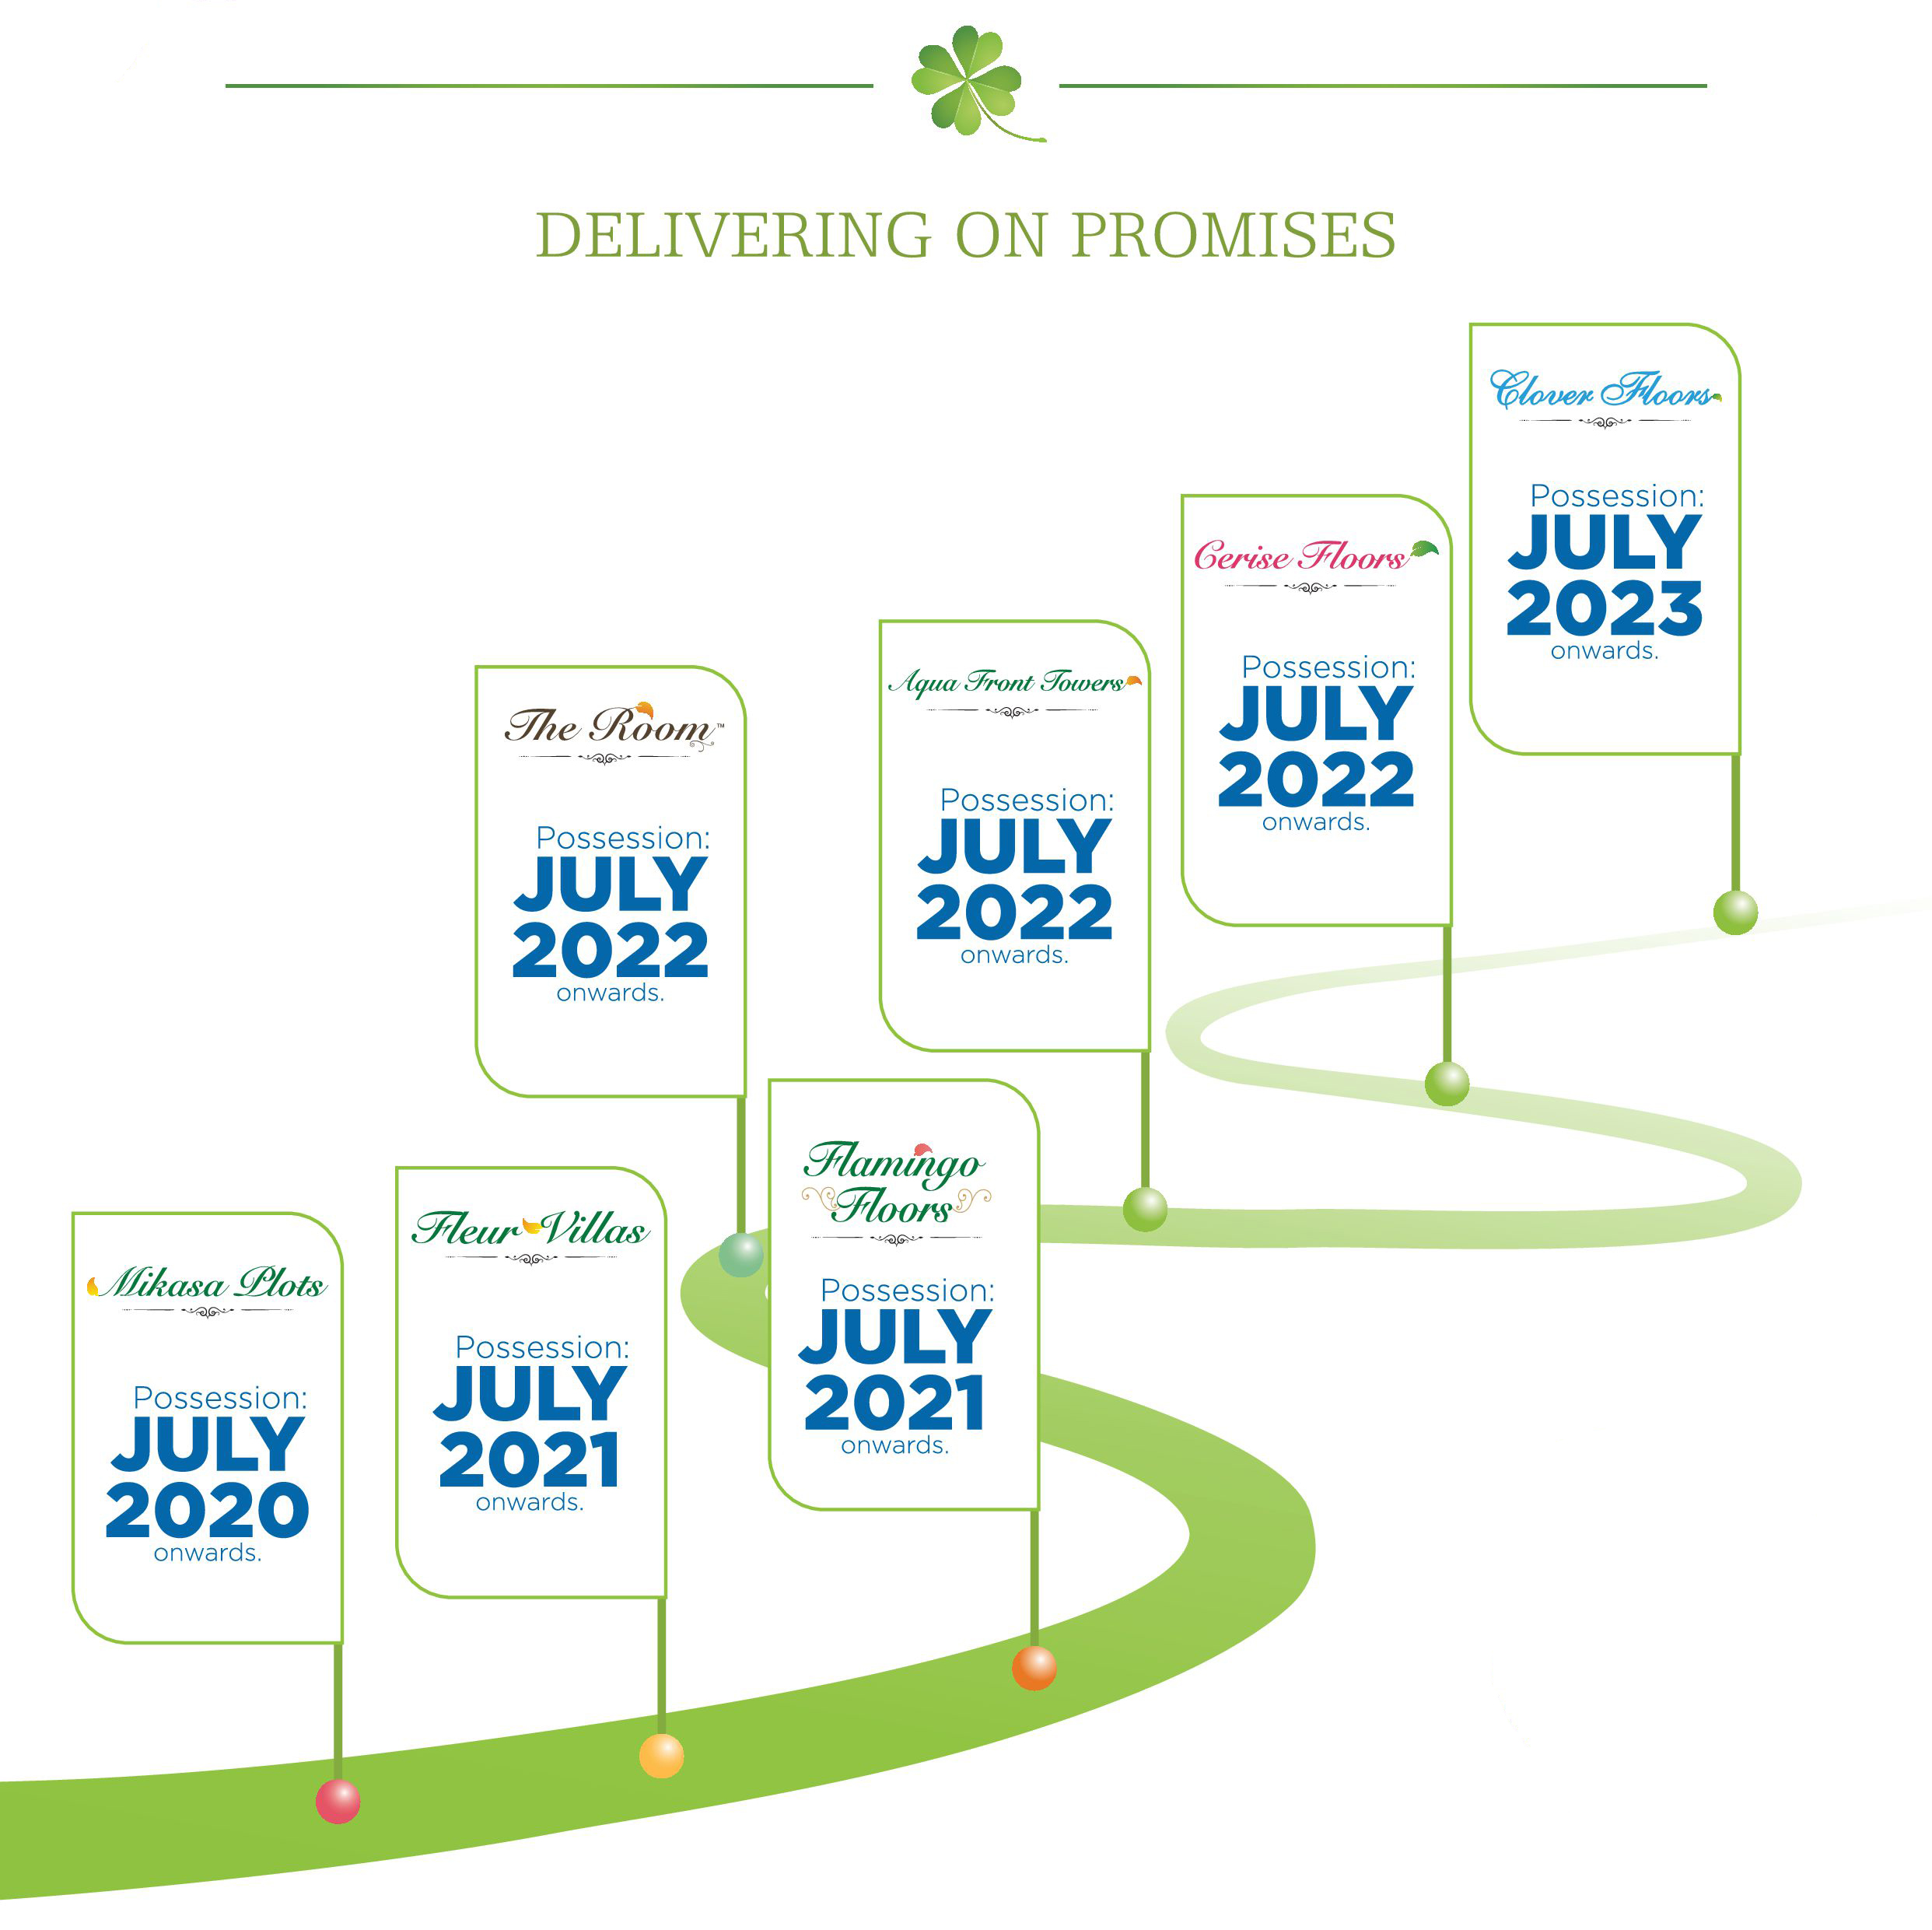 central park flower valley Project Delivery Plan